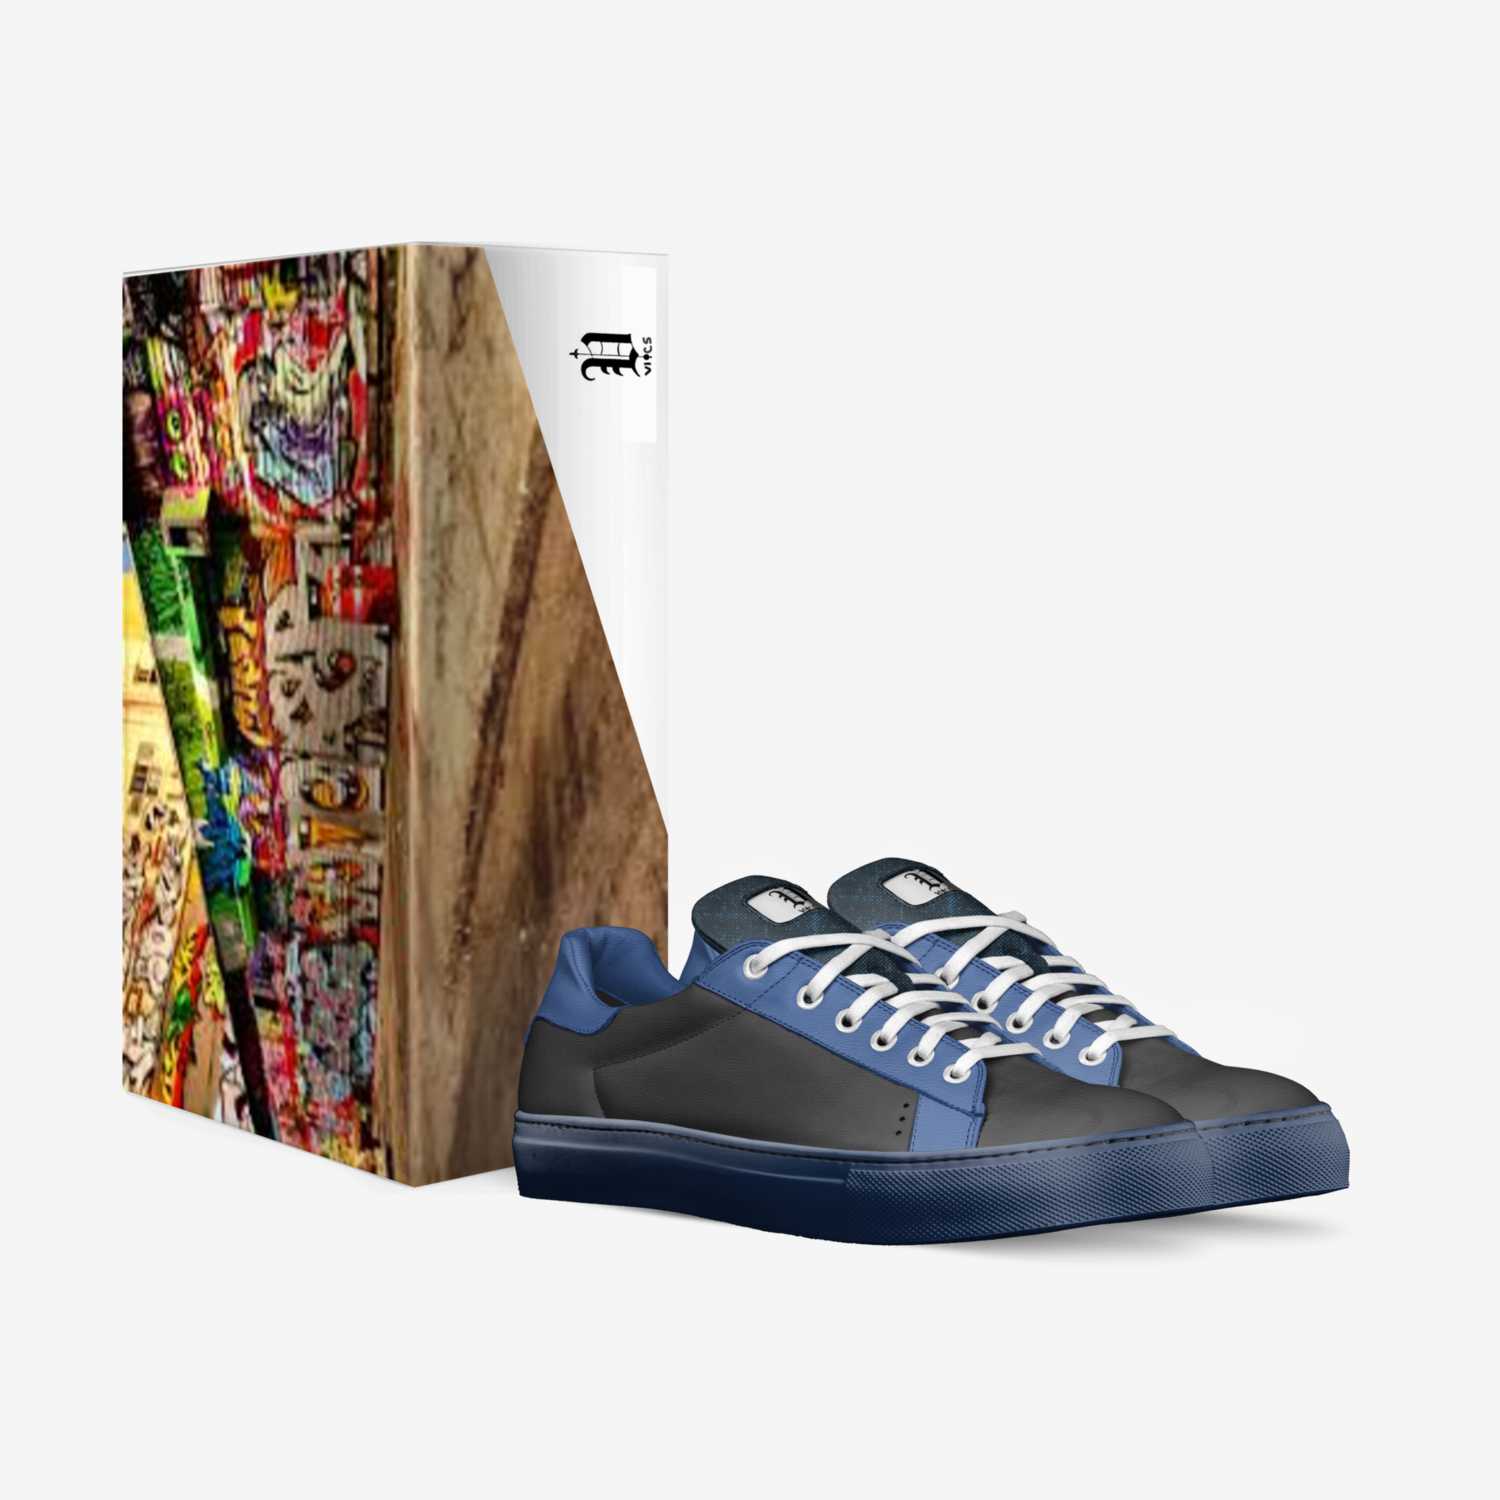 Vics street 4 custom made in Italy shoes by Brayden Murphy | Box view